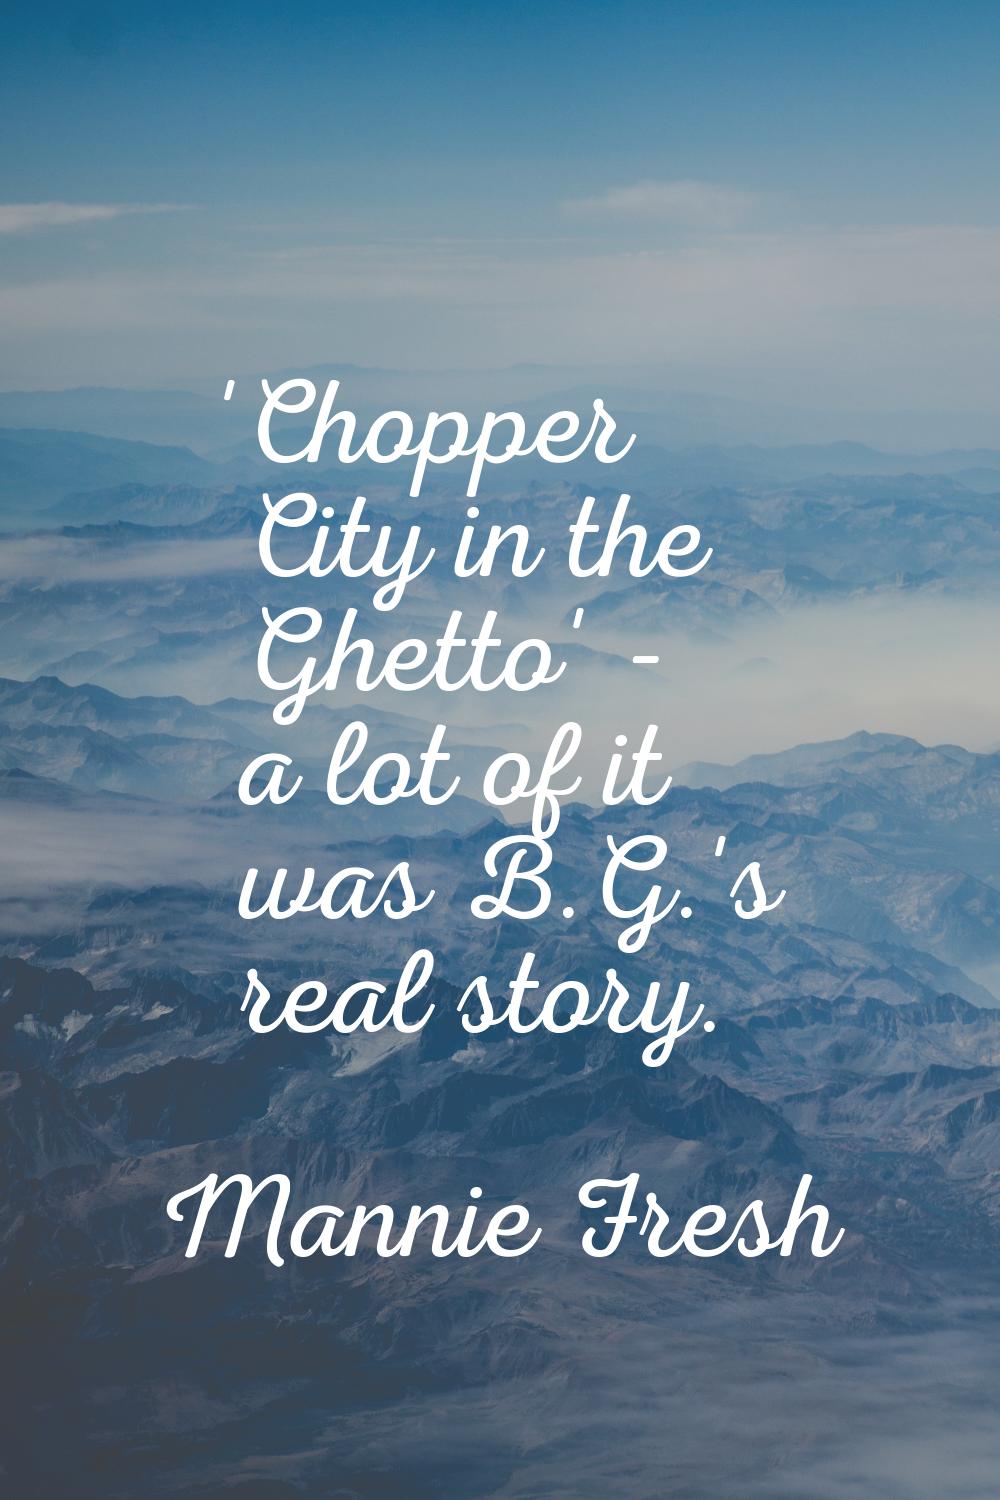 'Chopper City in the Ghetto' - a lot of it was B.G.'s real story.